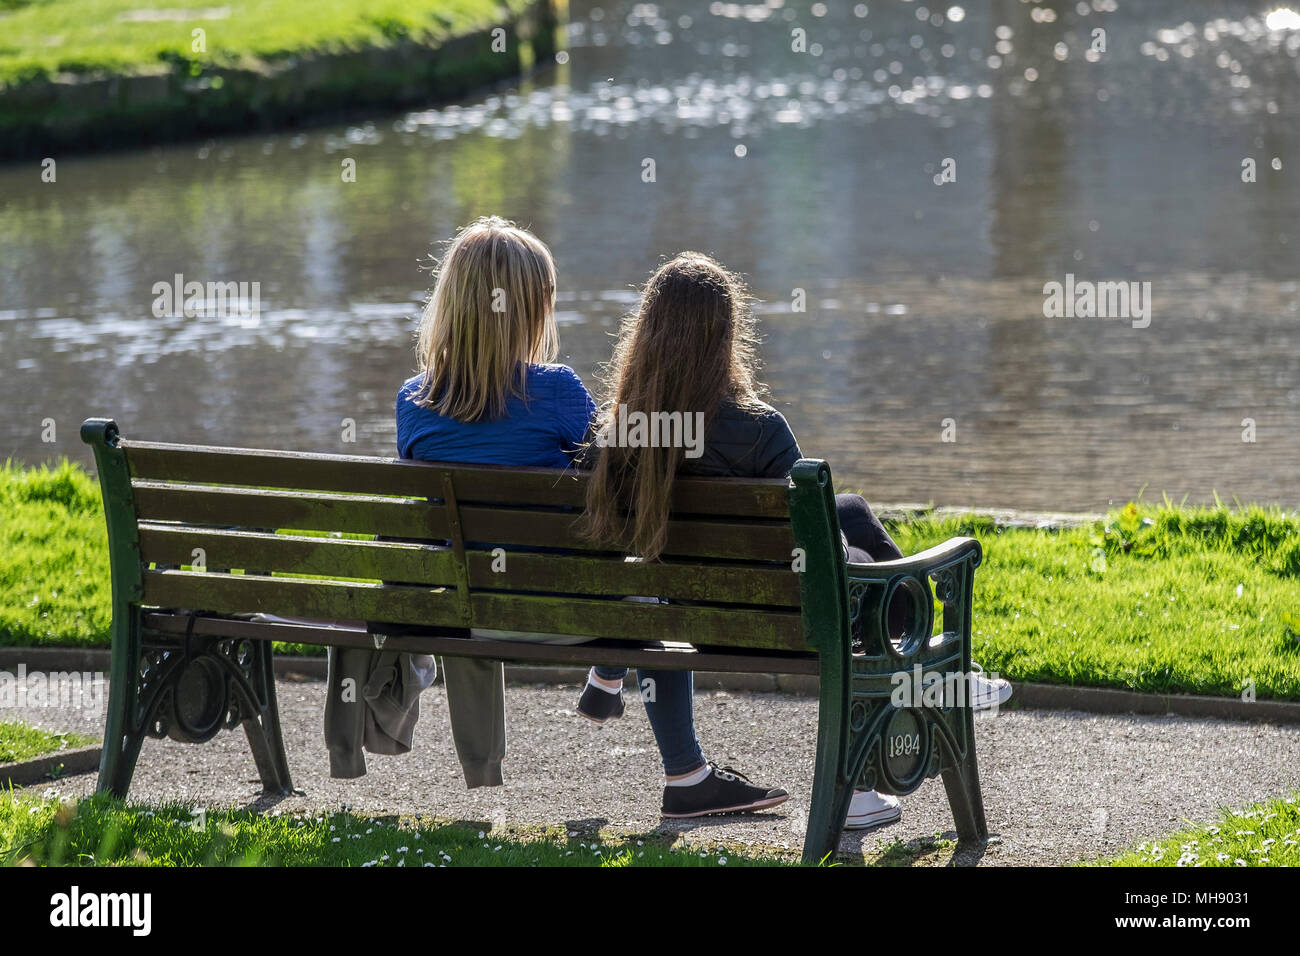 Two friends sitting on a bench overlooking a lake. Stock Photo